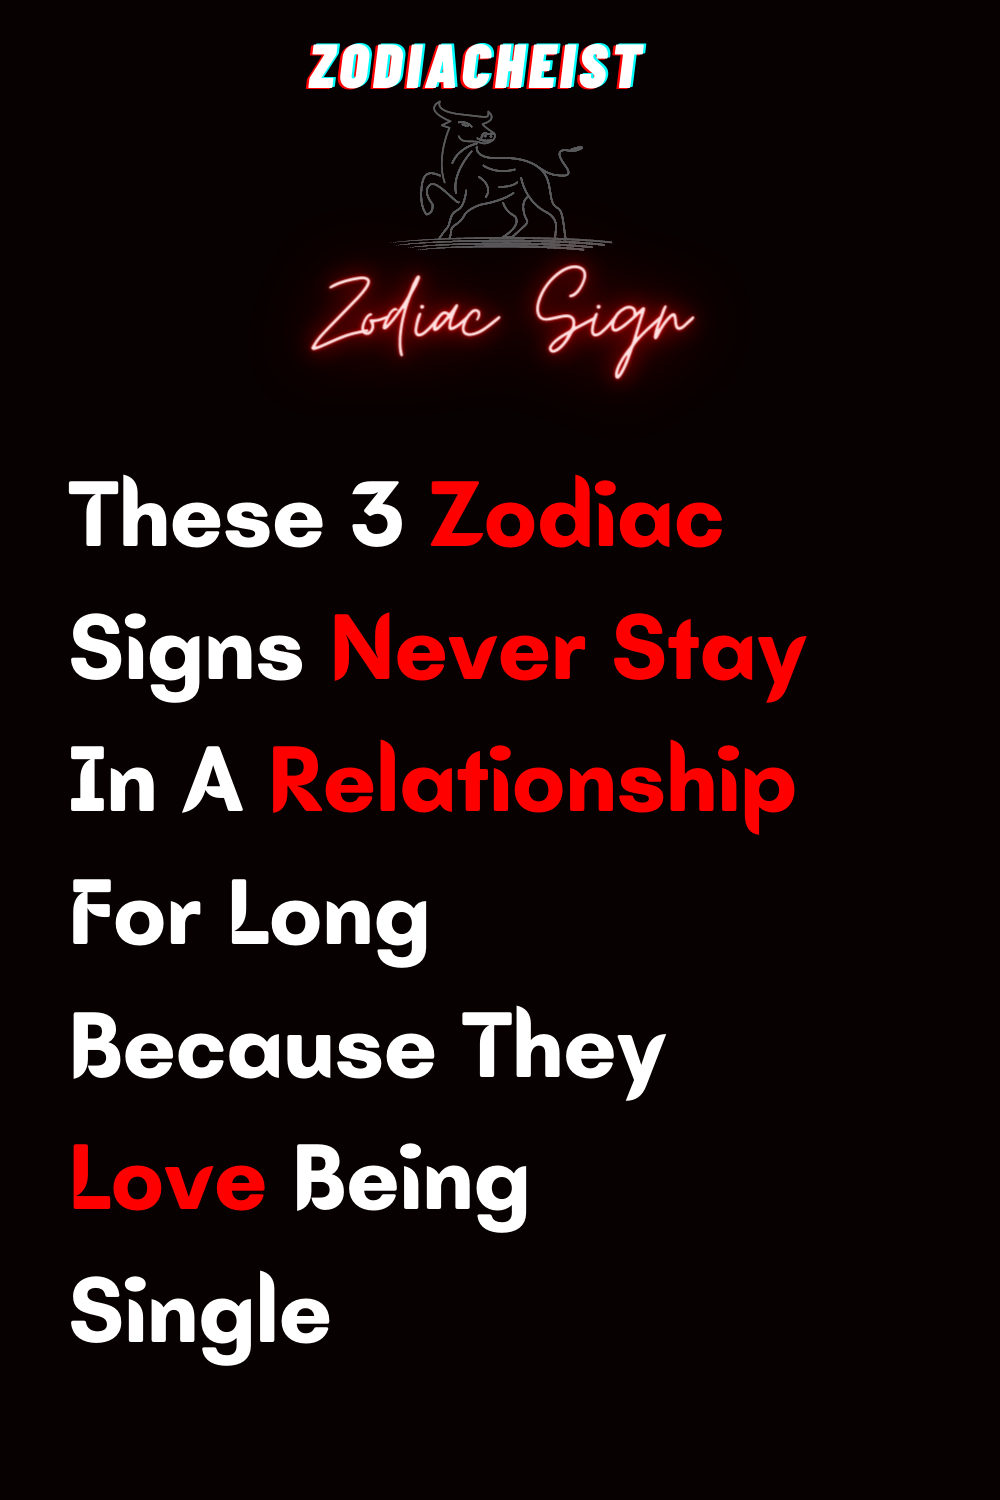 These 3 Zodiac Signs Never Stay In A Relationship For Long Because They ...